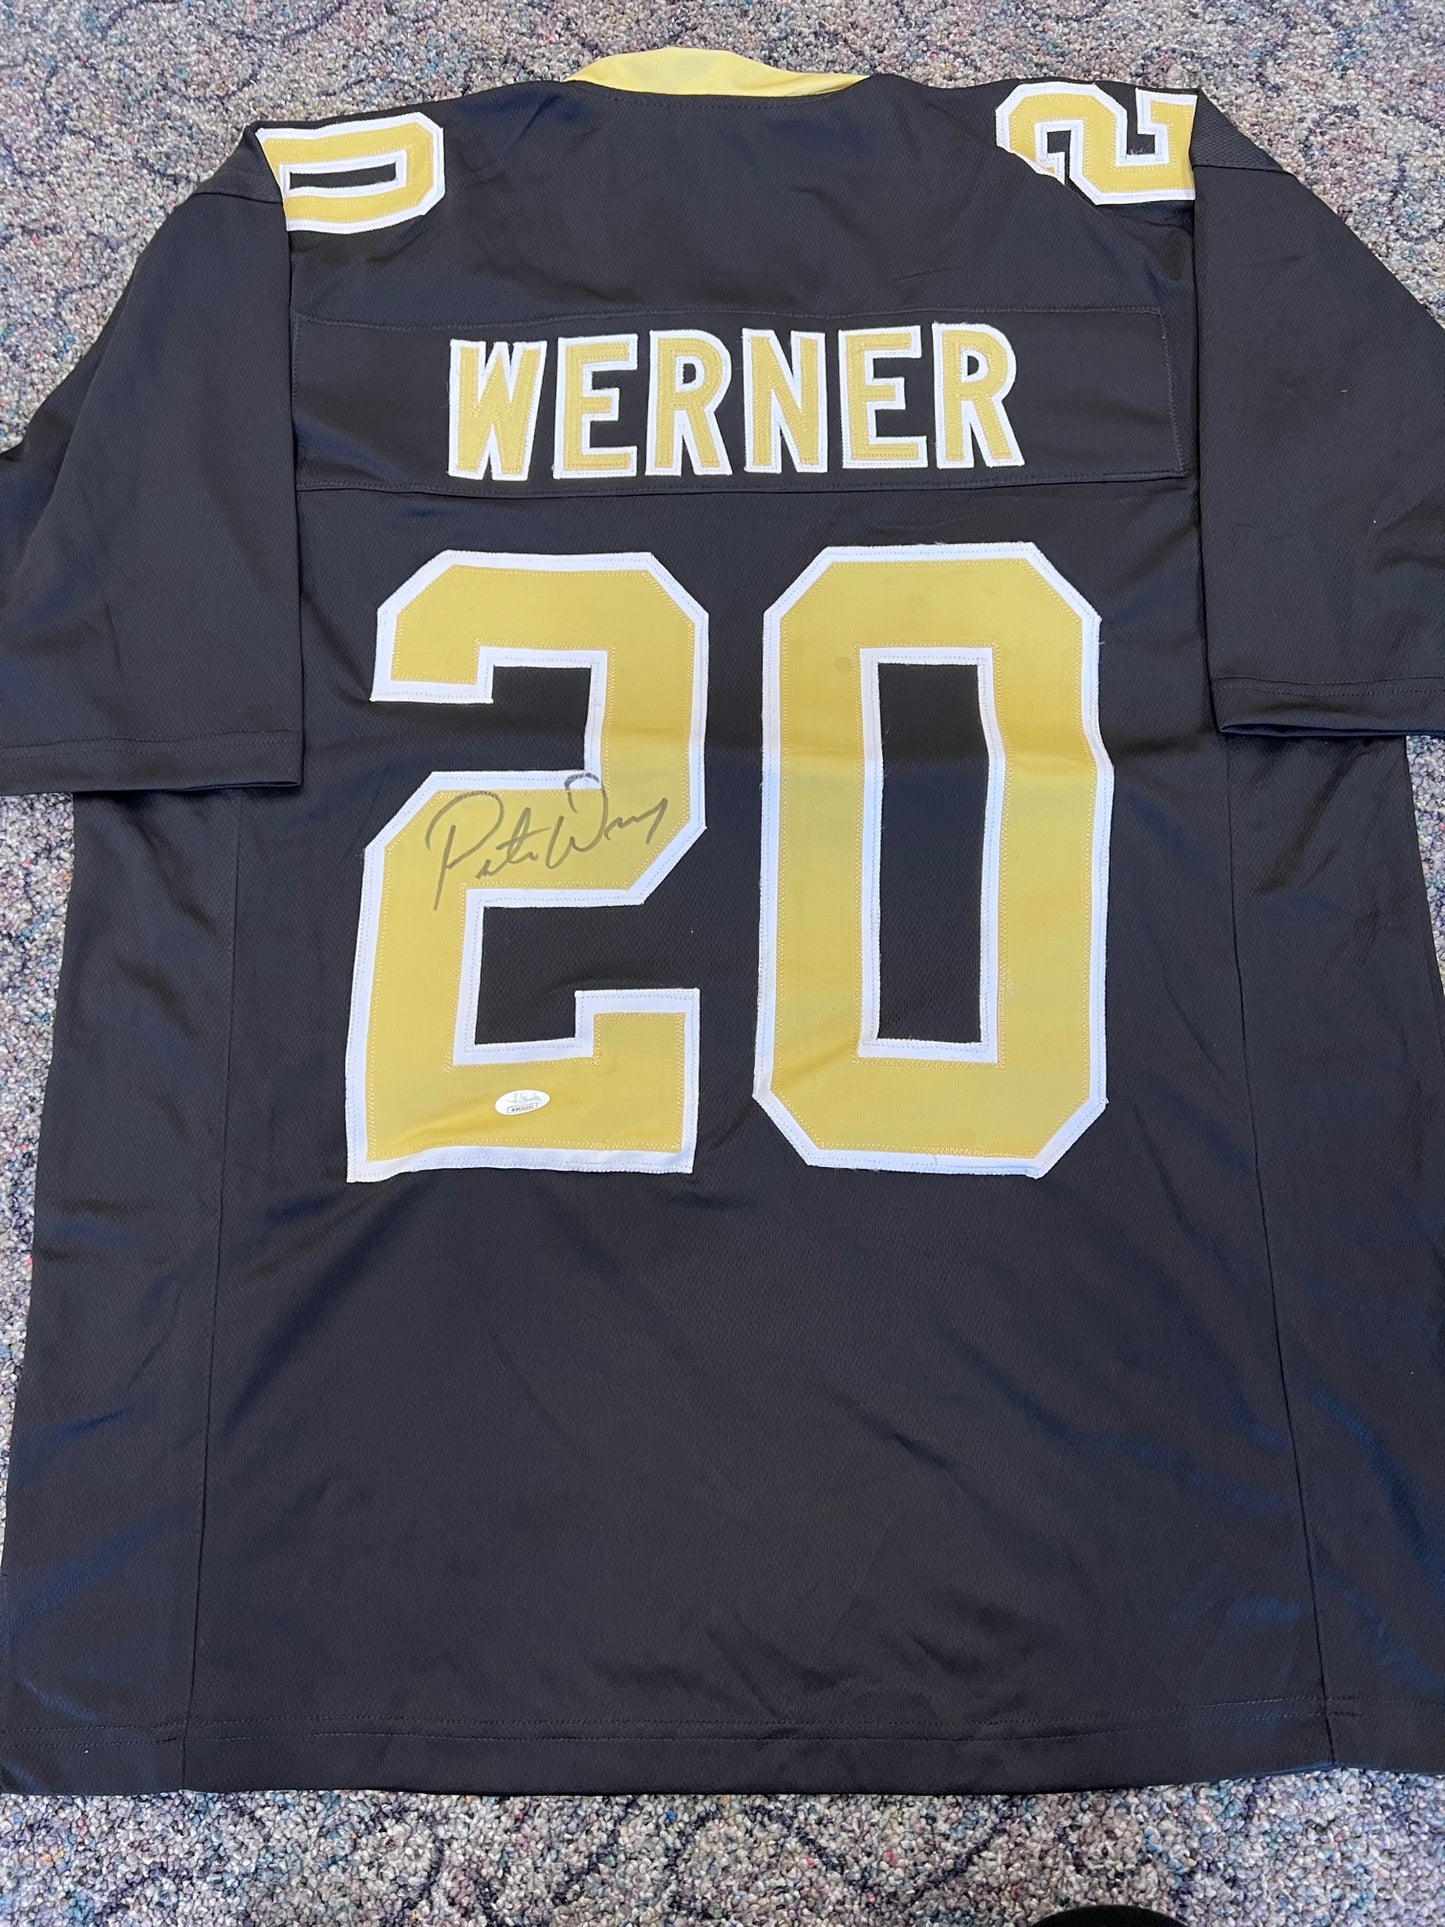 New Orleans Saints Pete Werner Signed Jersey with JSA COA